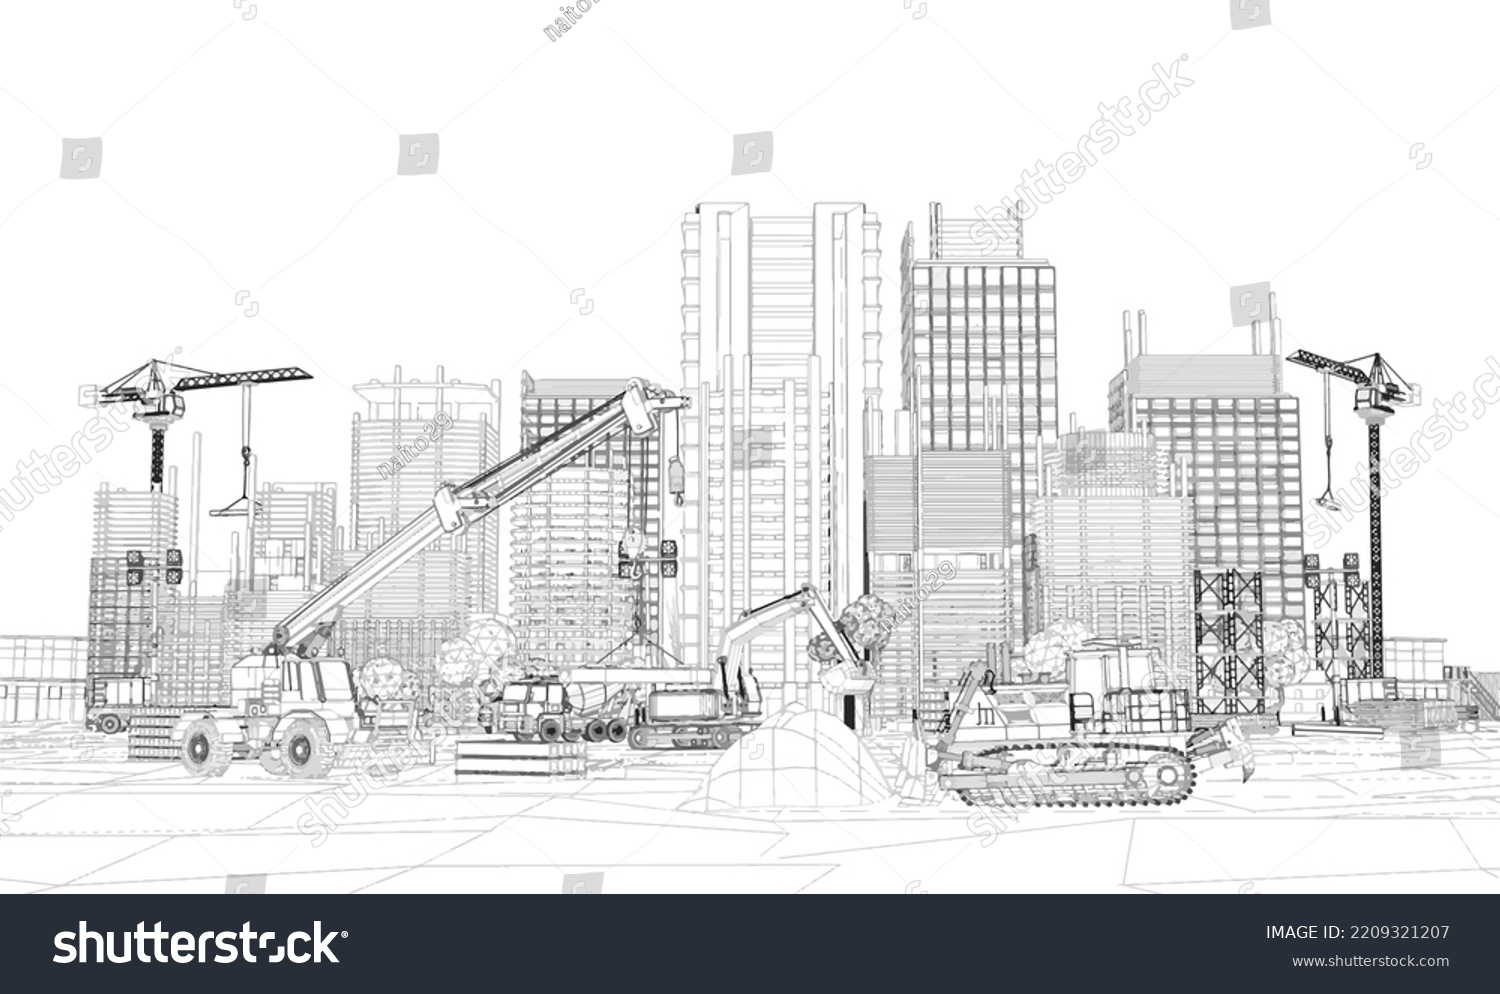 SVG of Building construction plan facades with machinery architectural sketch .Vector illustration svg